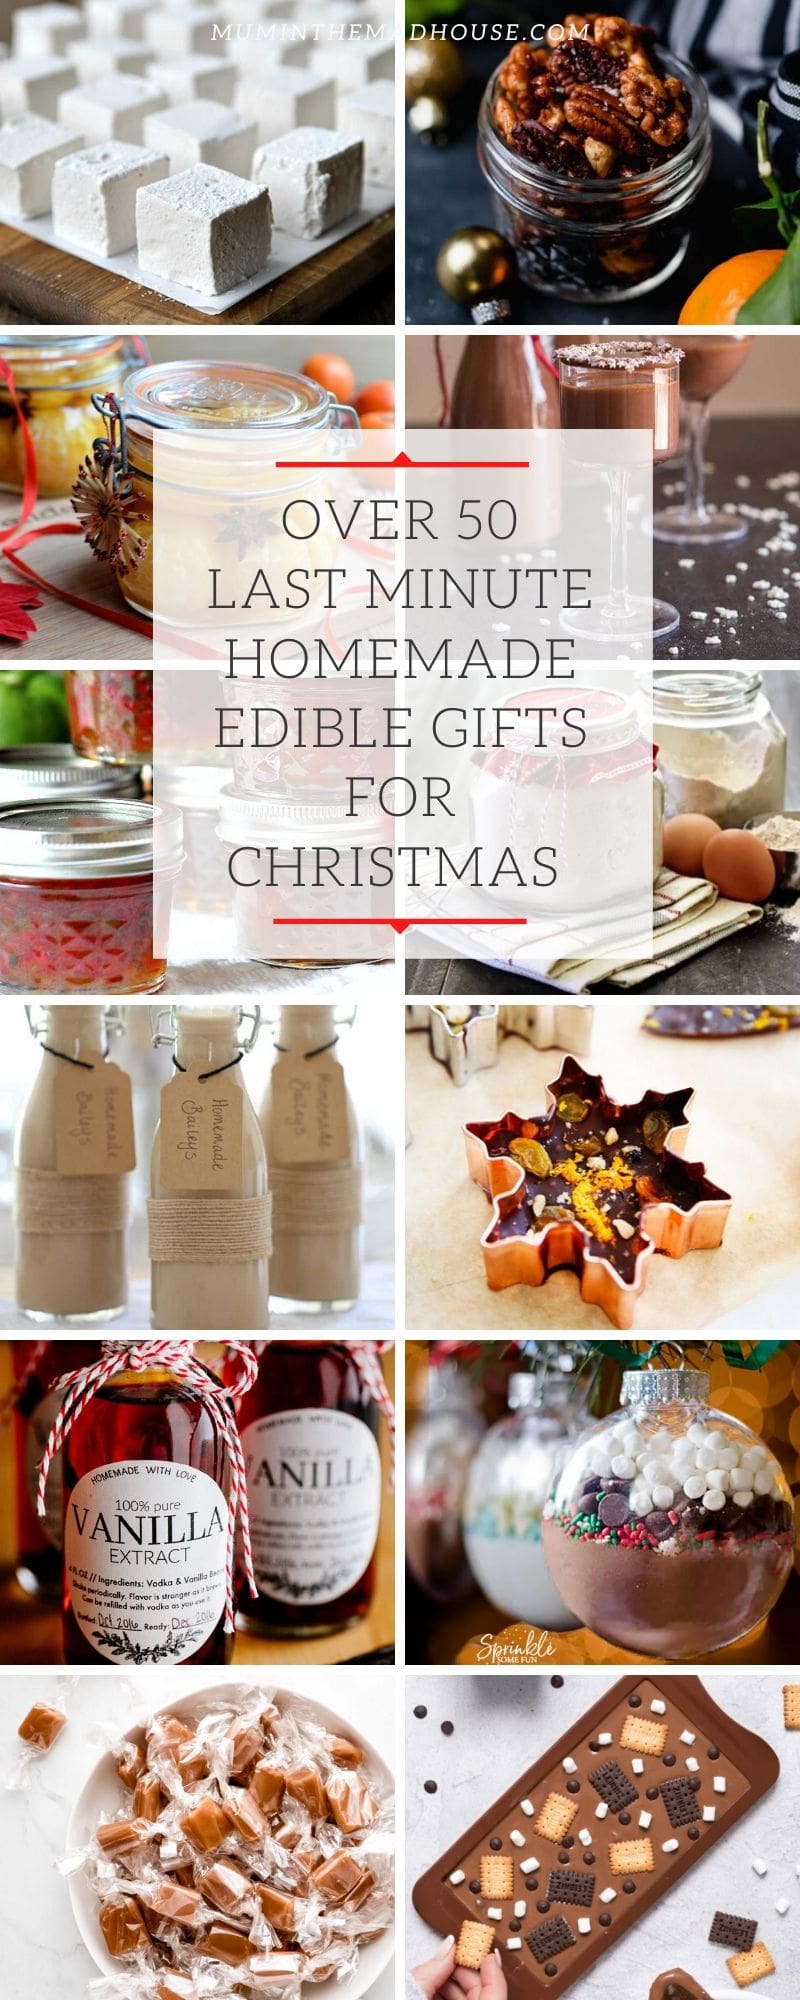 These food DIY Christmas gifts are perfect for any food lover in your life! There are ideas for spreads, baked goods, mixes, drinks and more. Something for anyone in your life. 